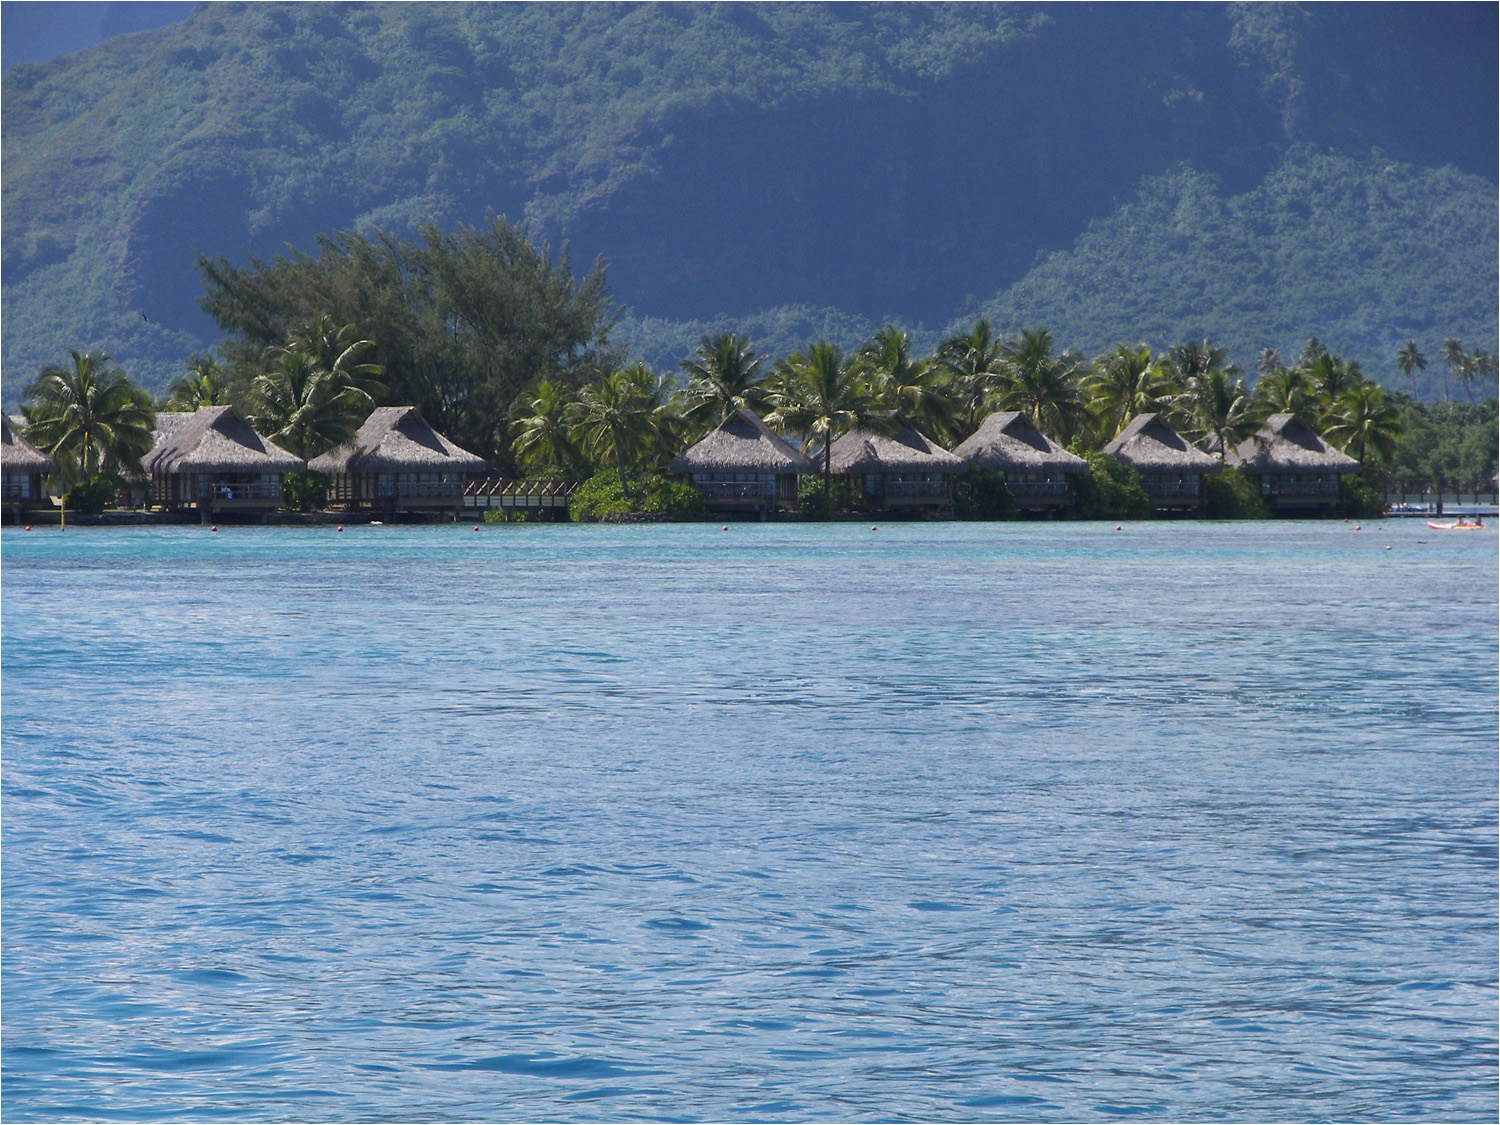 This is the Intercontinental Moorea resort where we stayed 10 years ago.